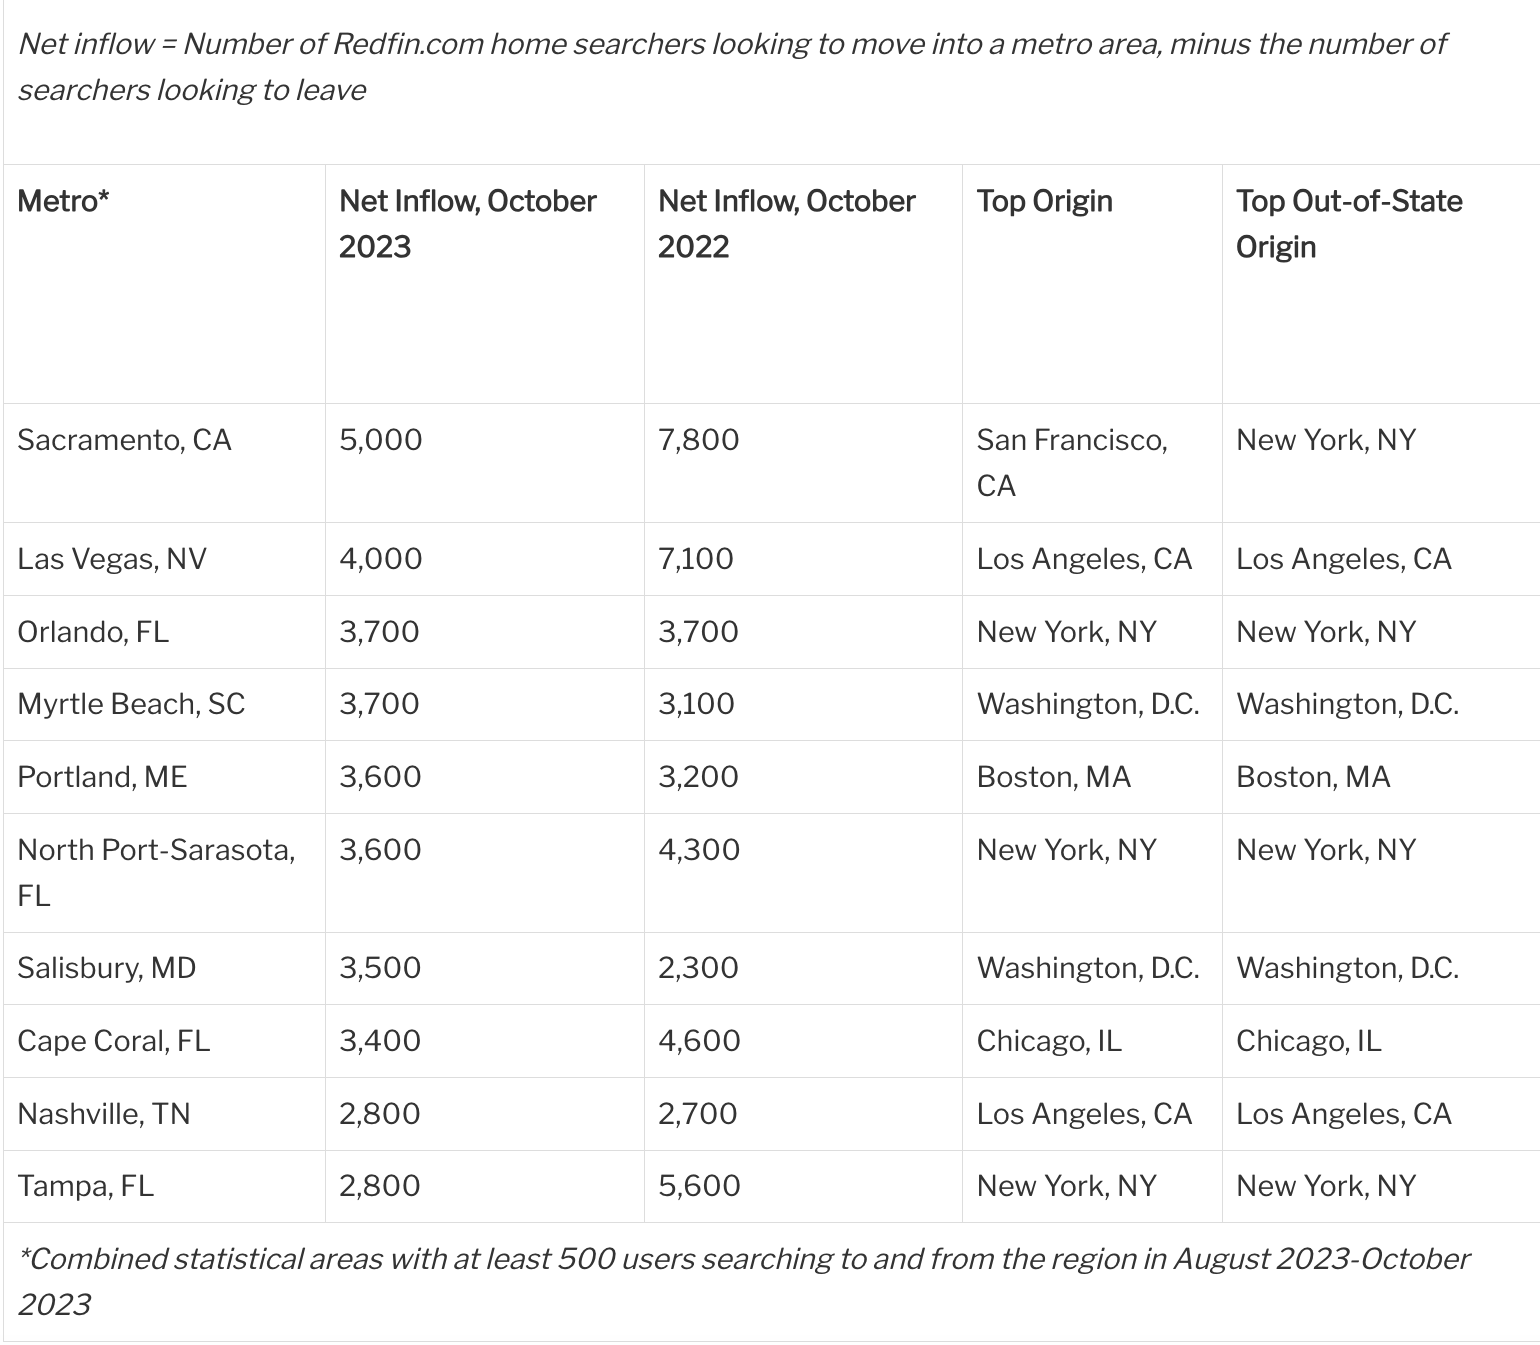 Top 10 Metros Homebuyers Are Moving Into, by Net Inflow - Redfin.com